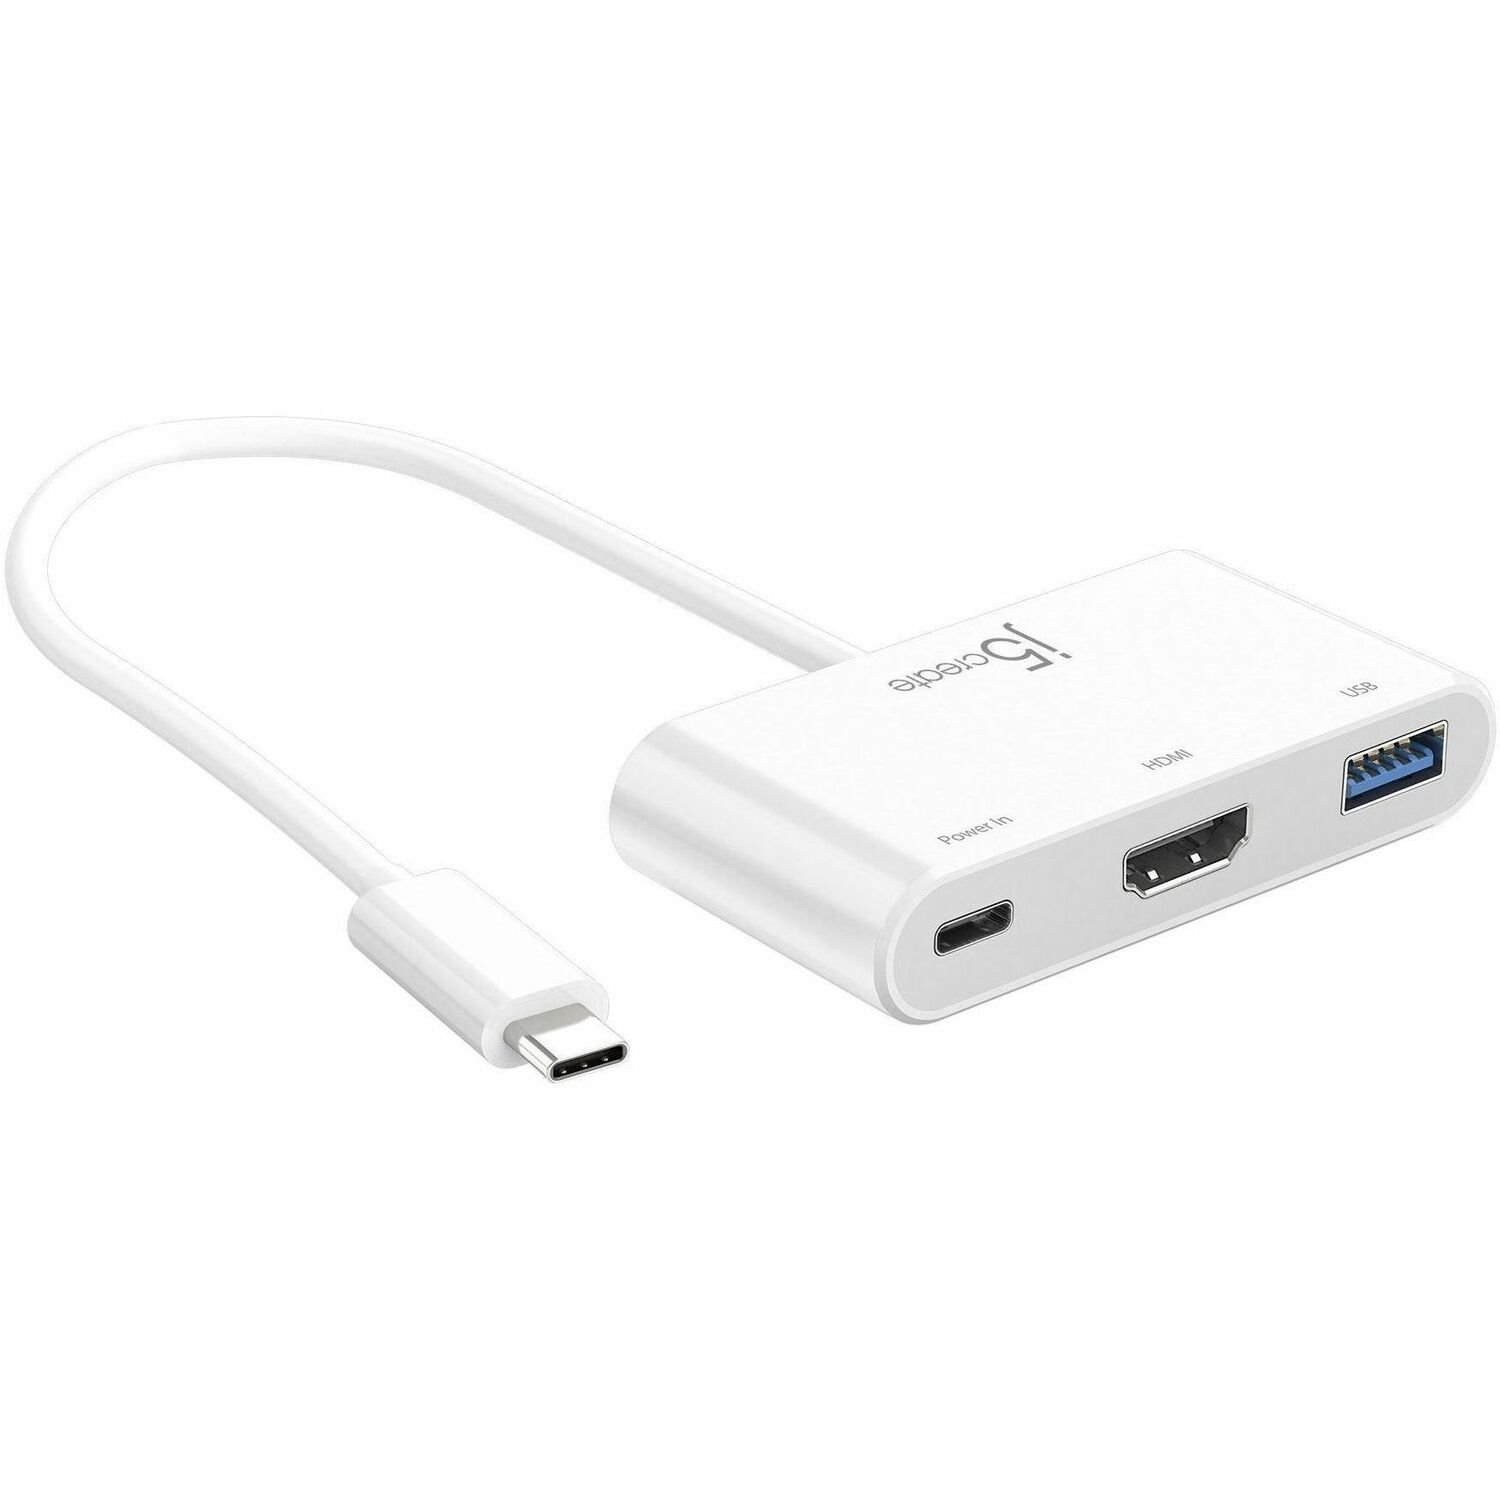 j5create USB-C to HDMI & USB 3.0 with Power Delivery